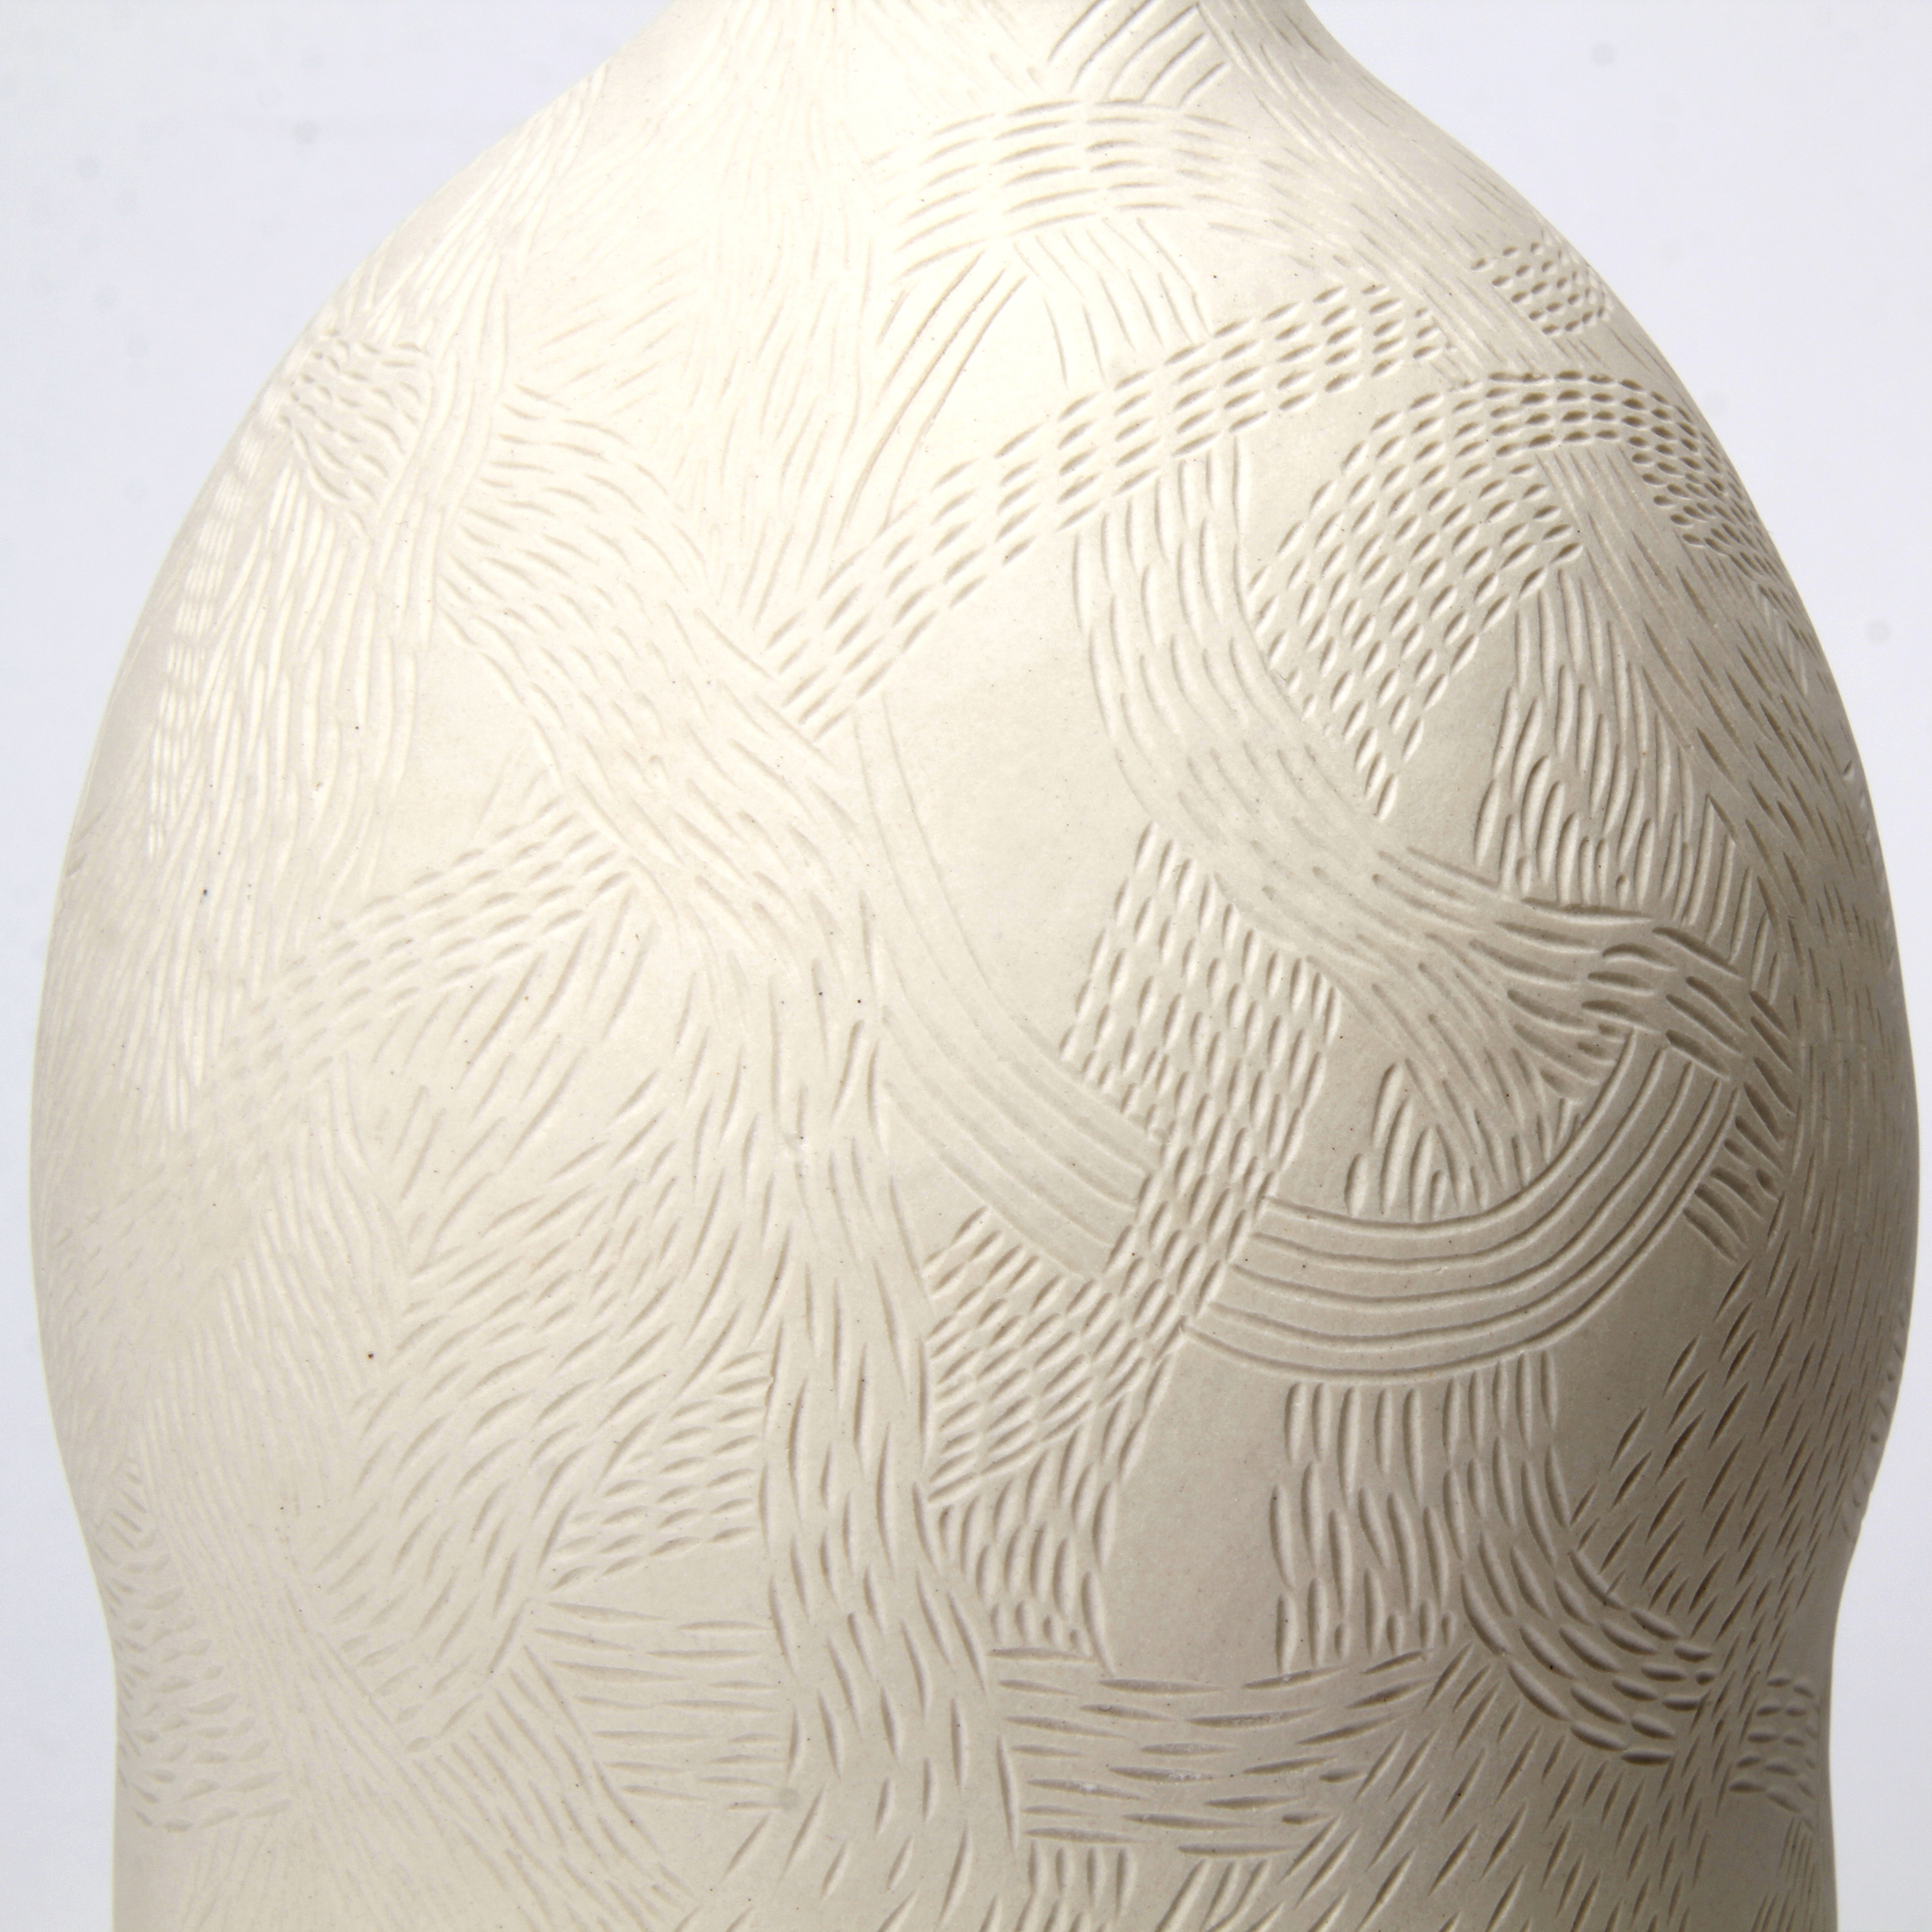 Talia Silva: Subtle Echoes – Fully Carved Circle Vessel Product Image 3 of 3